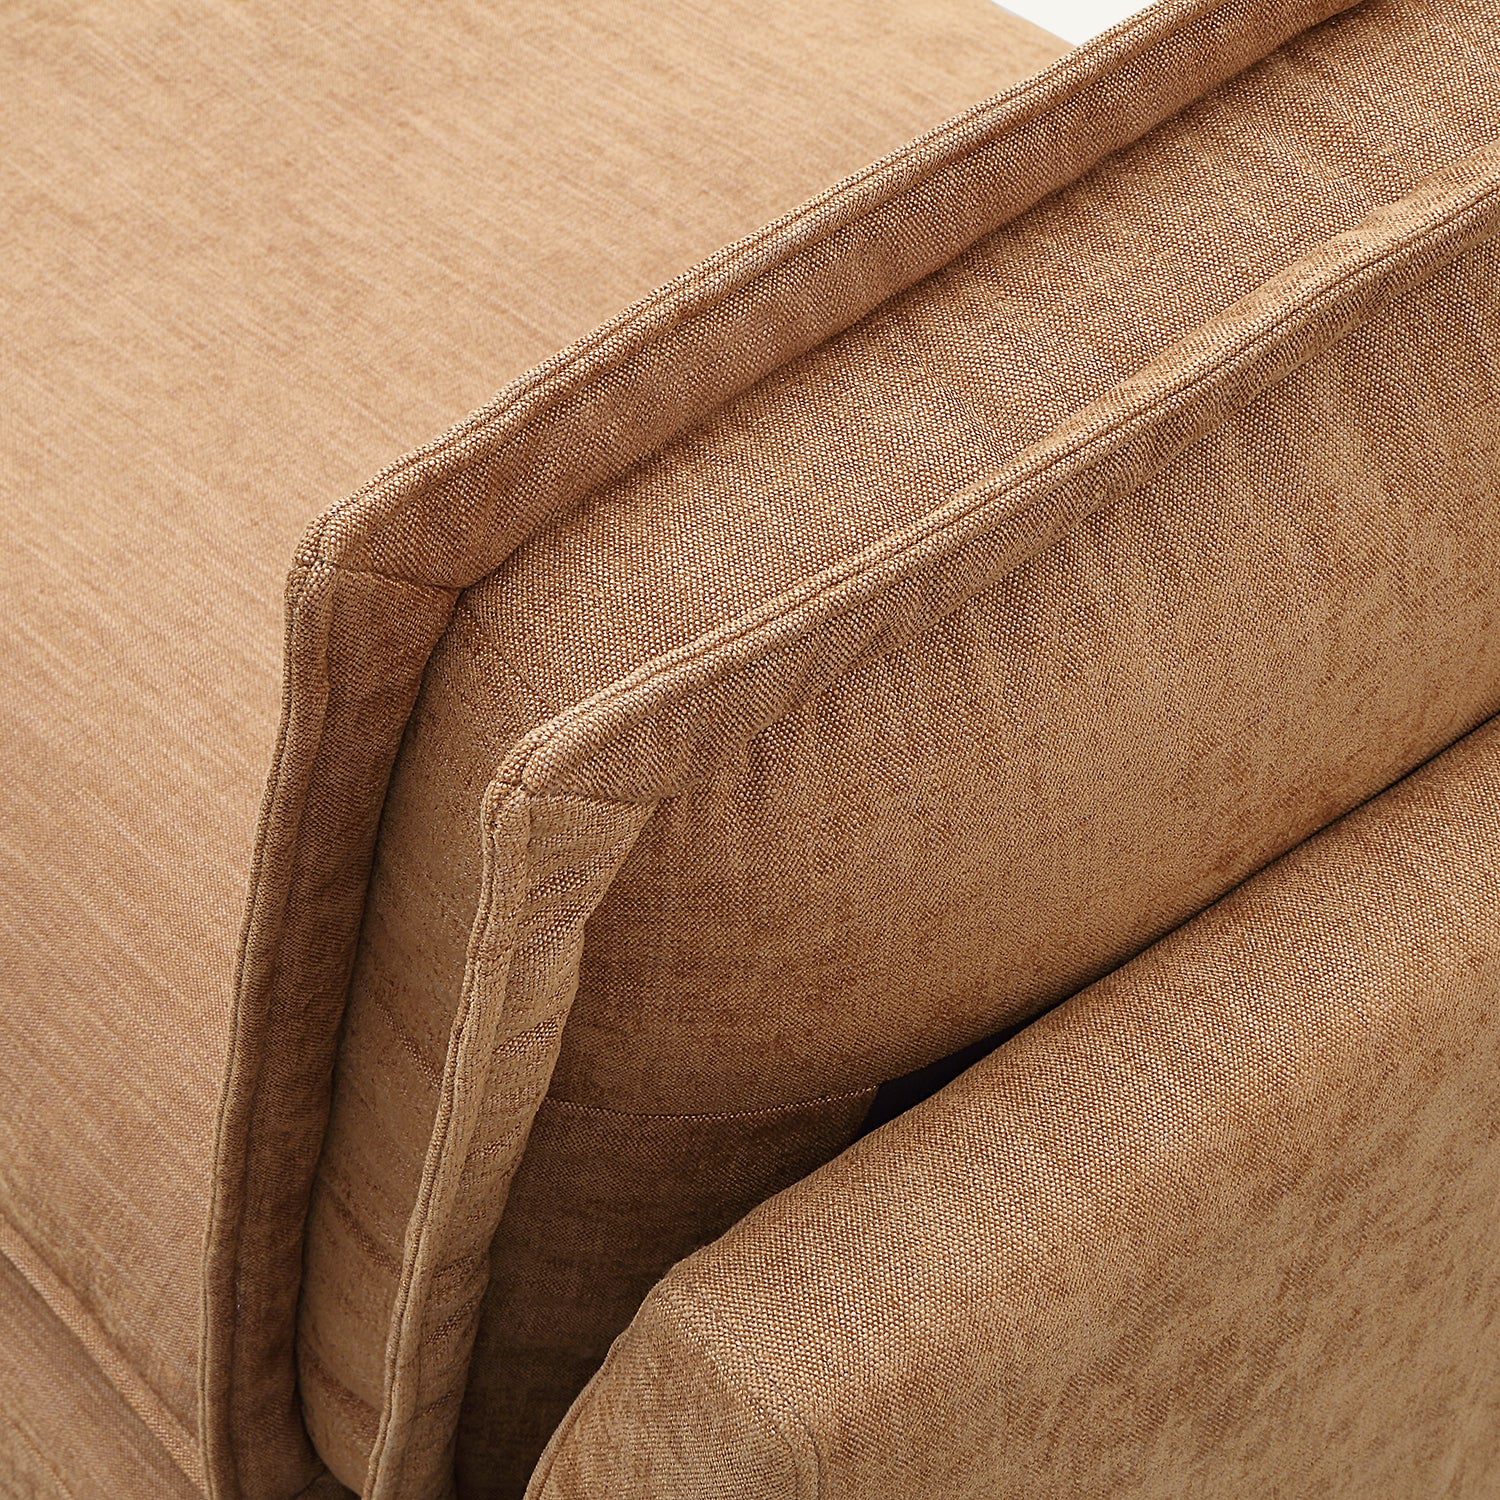 Stacked Tan Linen Armless Chaise Lounge